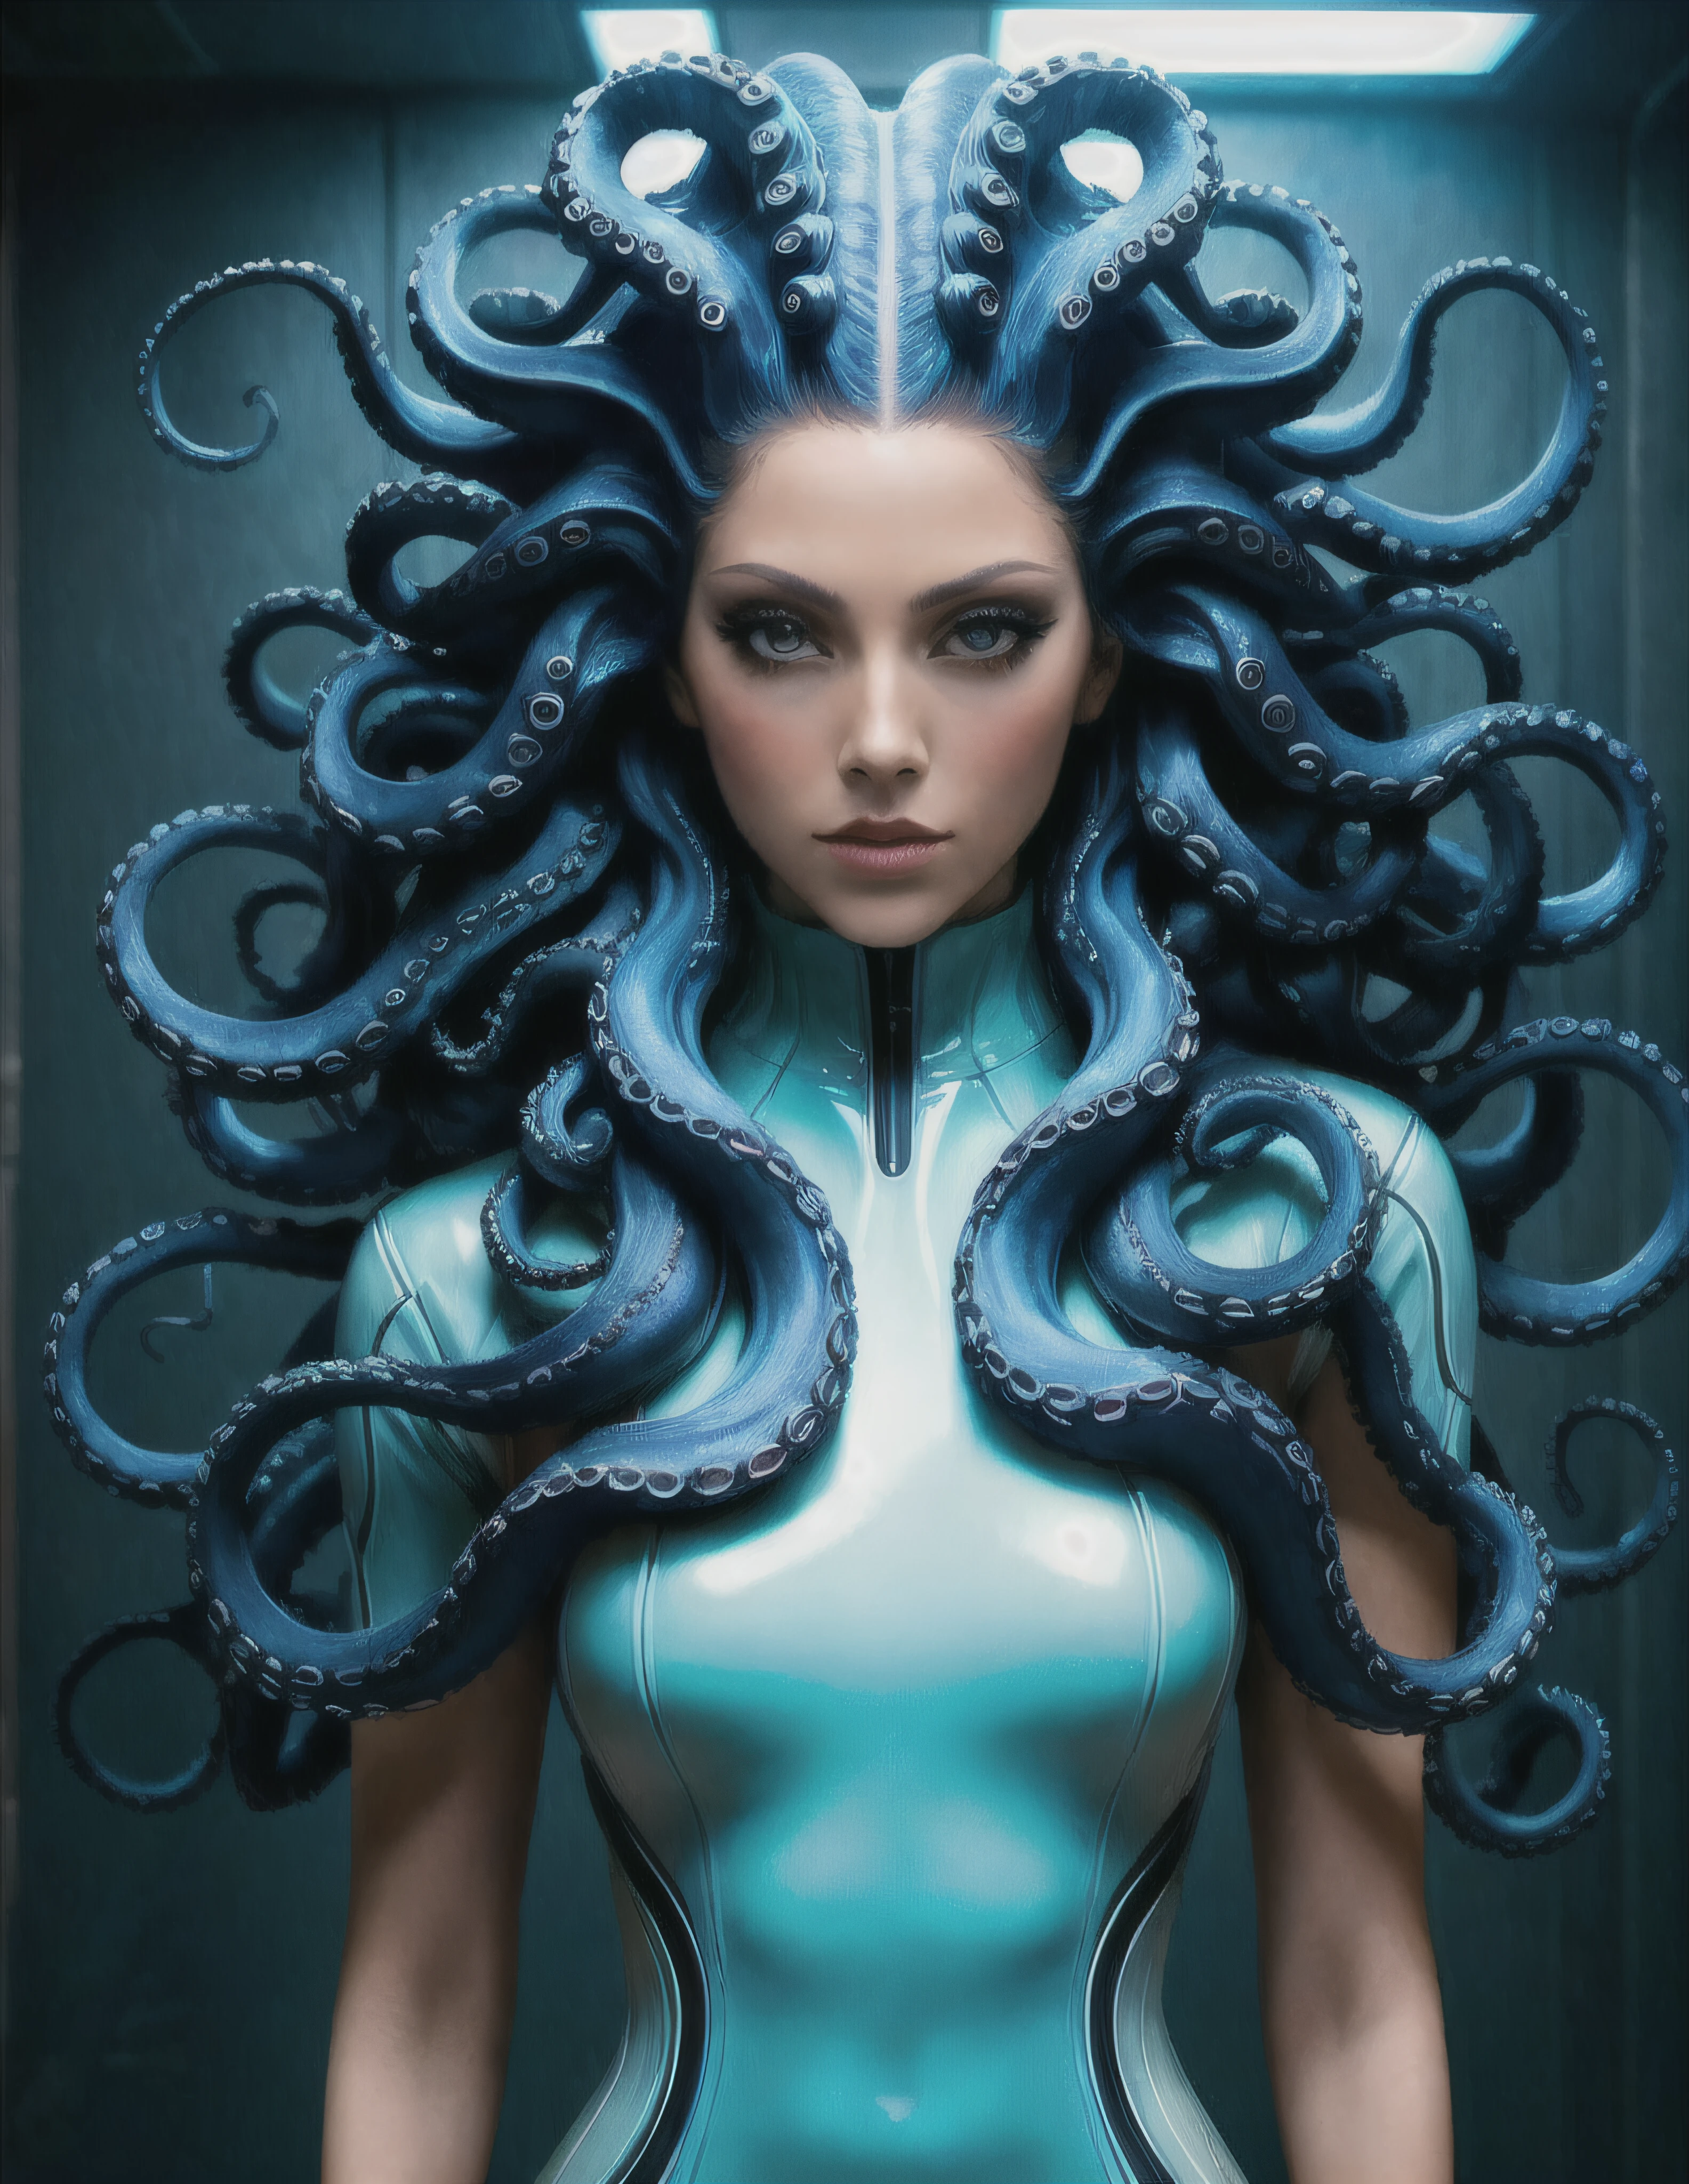 HDR photo of (Ultrarealistic:1.3) a woman with long octopus strands, cyberpunk medusa, portrait of a sci - fi woman, portrait of an octopus goddess, dark portrait of medusa, beautiful octopus woman, portrait of a cyborg queen, alien woman, portrait of teenage medusa, young woman as medusa, scifi woman, portrait beautiful sci - fi girl, female medusa long hair, futuristic woman portrait with a woman with long coiled hair and a horn, cyberpunk medusa, dark portrait of medusa, portrait of an octopus goddess, young woman as medusa, beautiful octopus woman, portrait of teenage medusa, medusa made of wax, long flowing medusa hair, medusa made of soft wax, portrait of medusa, female medusa long hair, beautiful female gorgon, fierce medusa . High dynamic range, vivid, rich details, clear shadows and highlights, realistic, intense, enhanced contrast, highly detailed